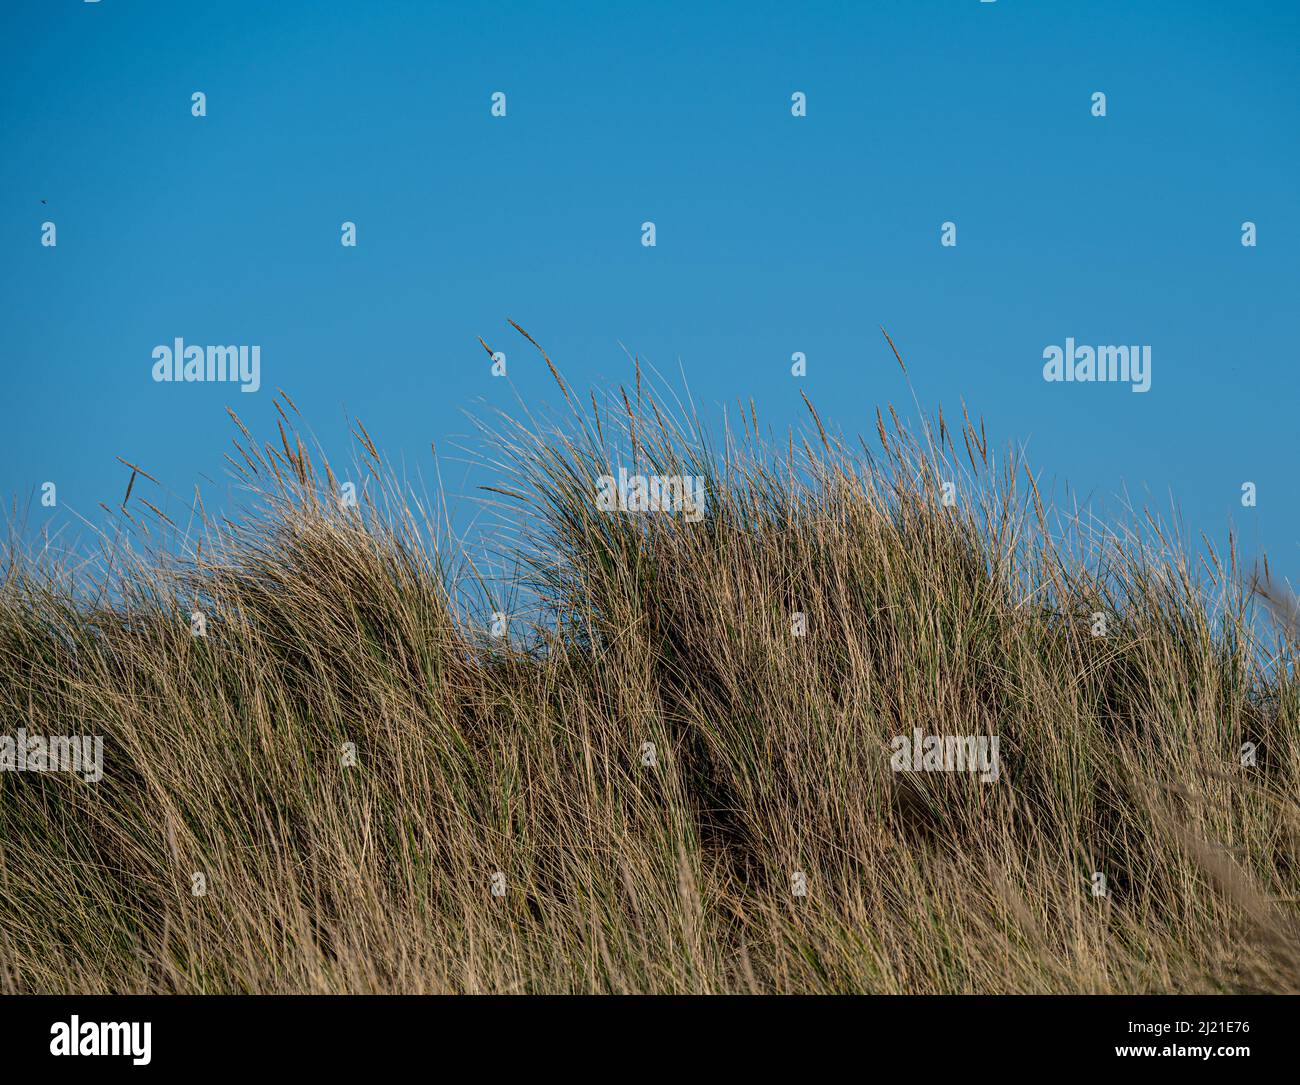 Marram grass growing on sand dunes against a bright blue sky. Stock Photo